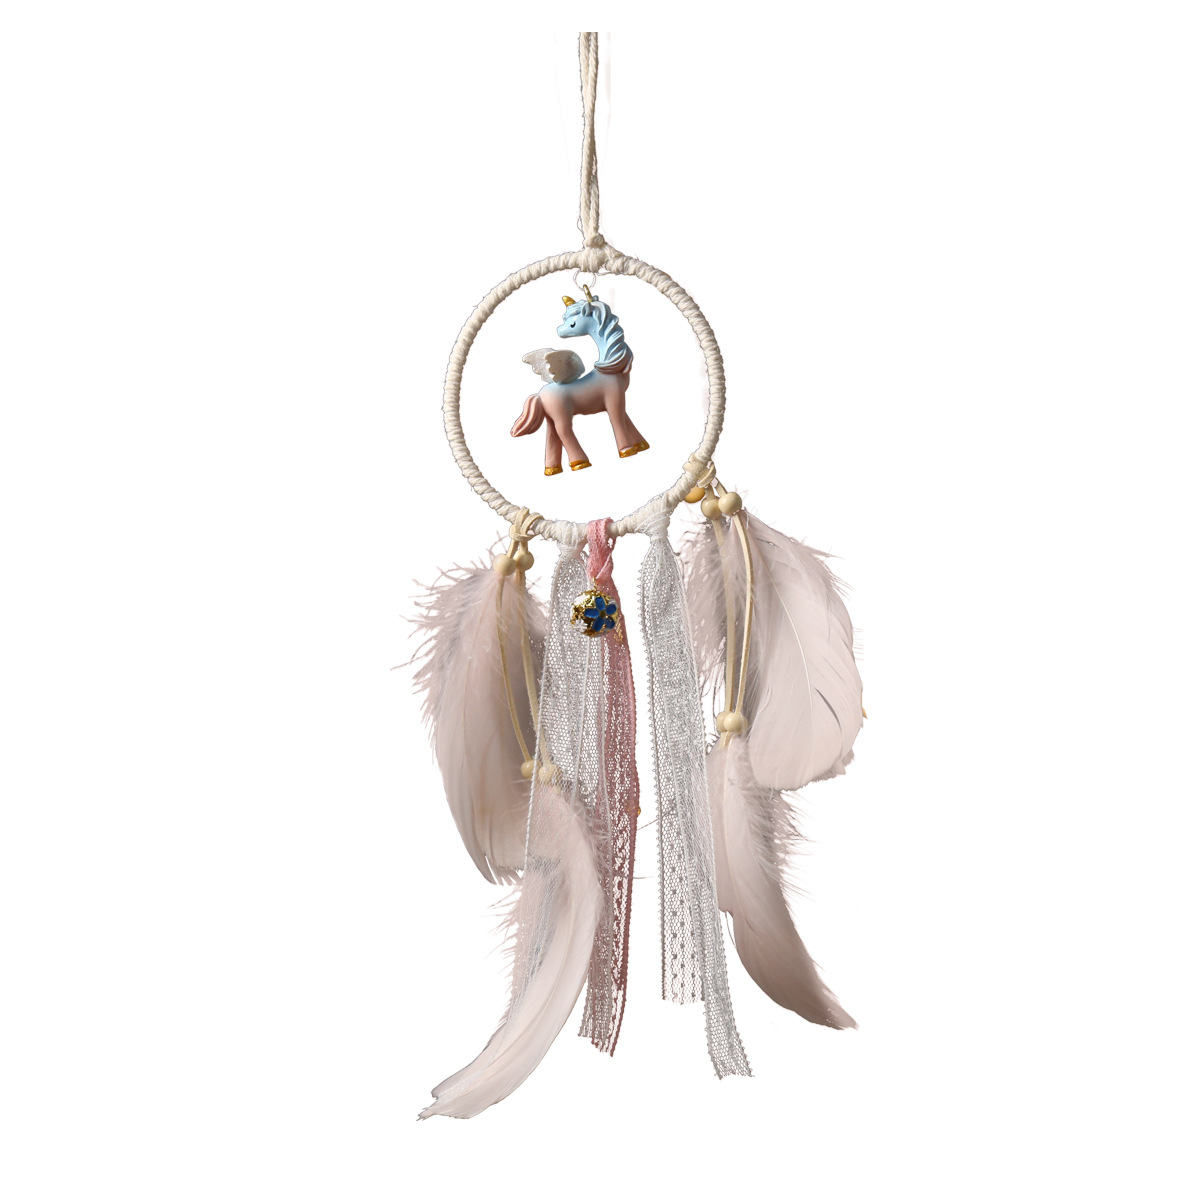 Modern Minimalist Creative Unicorn Dreamcatcher Room Hanging Decorations Cute Birthday and Holiday Gift Charms Hangings